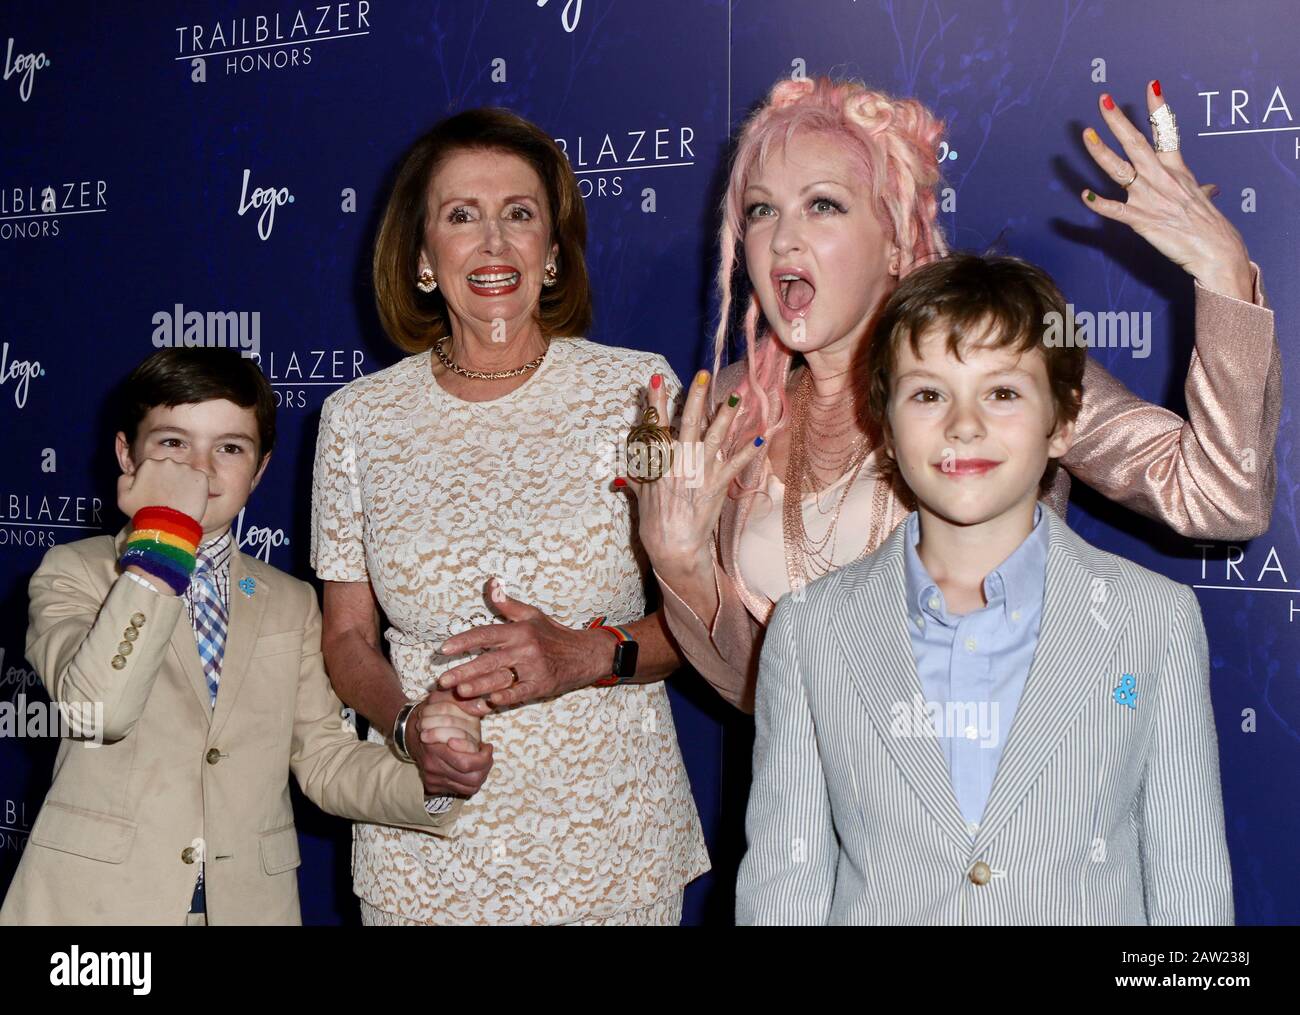 NEW YORK, NY - JUNE 22: Cyndi Lauper, Thomas Vos, Nancy Pelosi, Paul Vos attends Logo's 2017 Trailblazer Honors Awards show at Cathedral of St. John the Divine on June 22, 2017 in New York City.    People:  Cyndi Lauper, Thomas Vos, Nancy Pelosi, Paul Vos Stock Photo